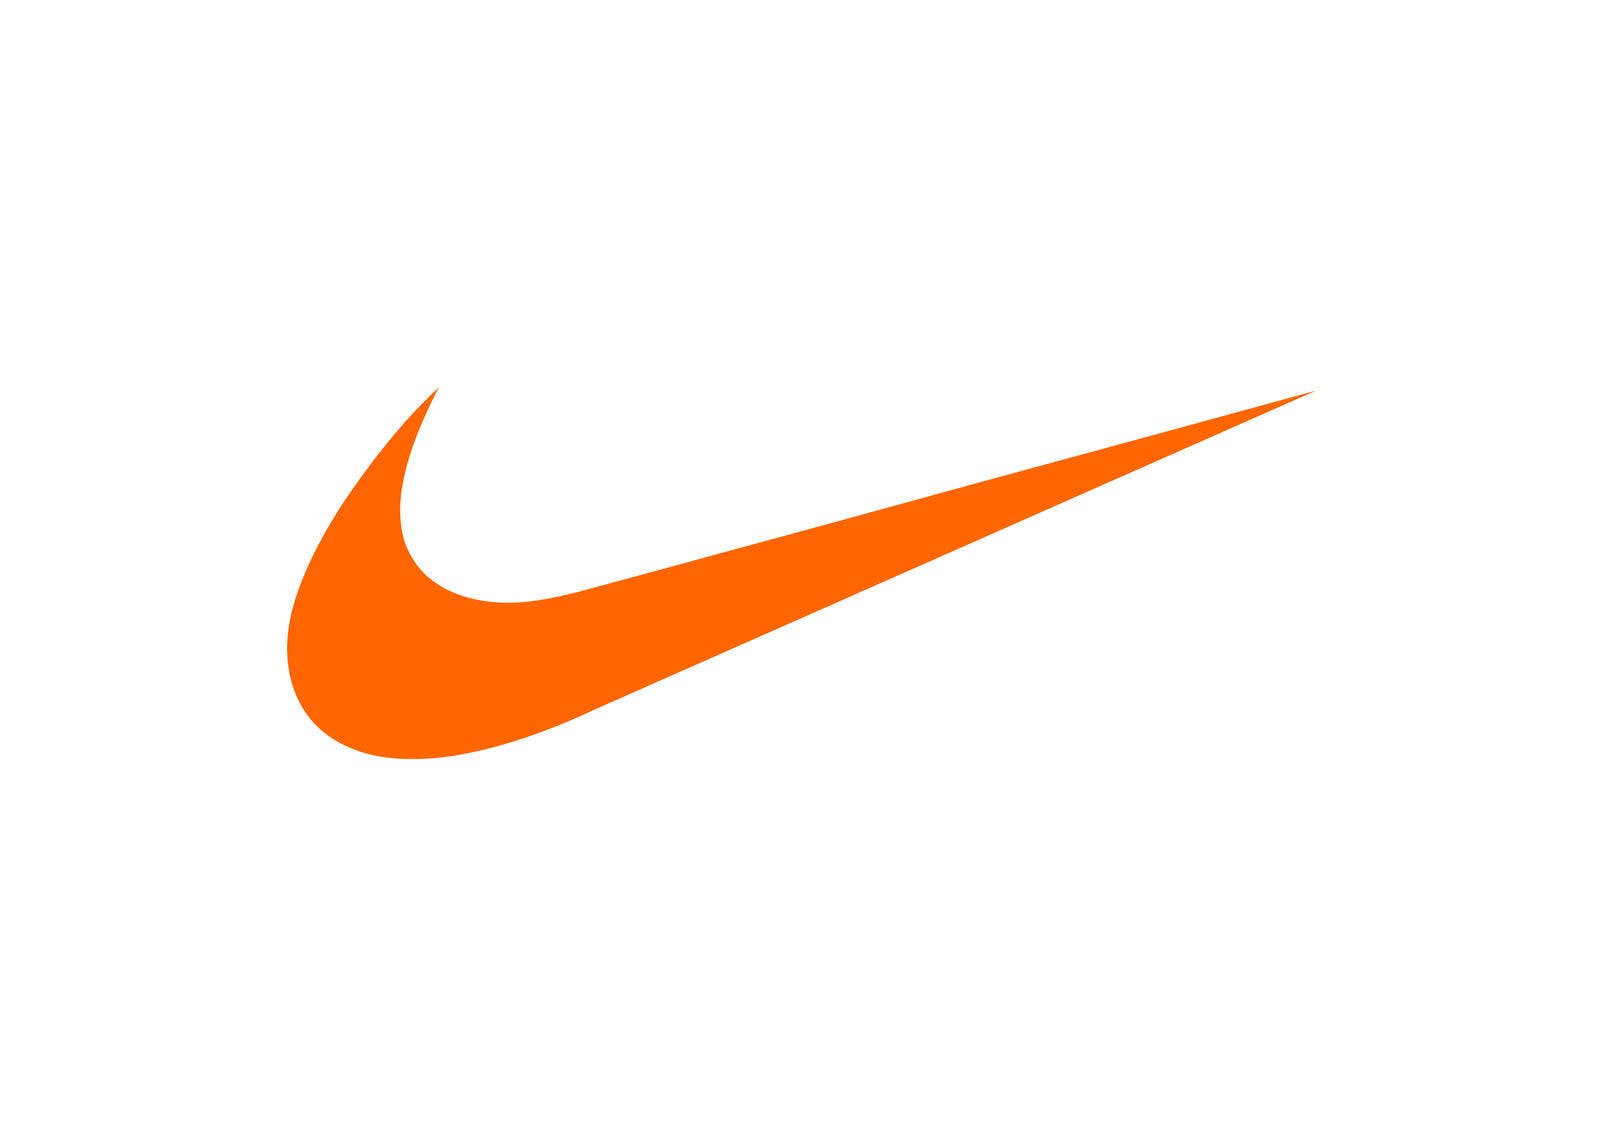 Nike Just Does It: Analyst Likes Favorable Risk Reward, Shift From Wholesale To DTC